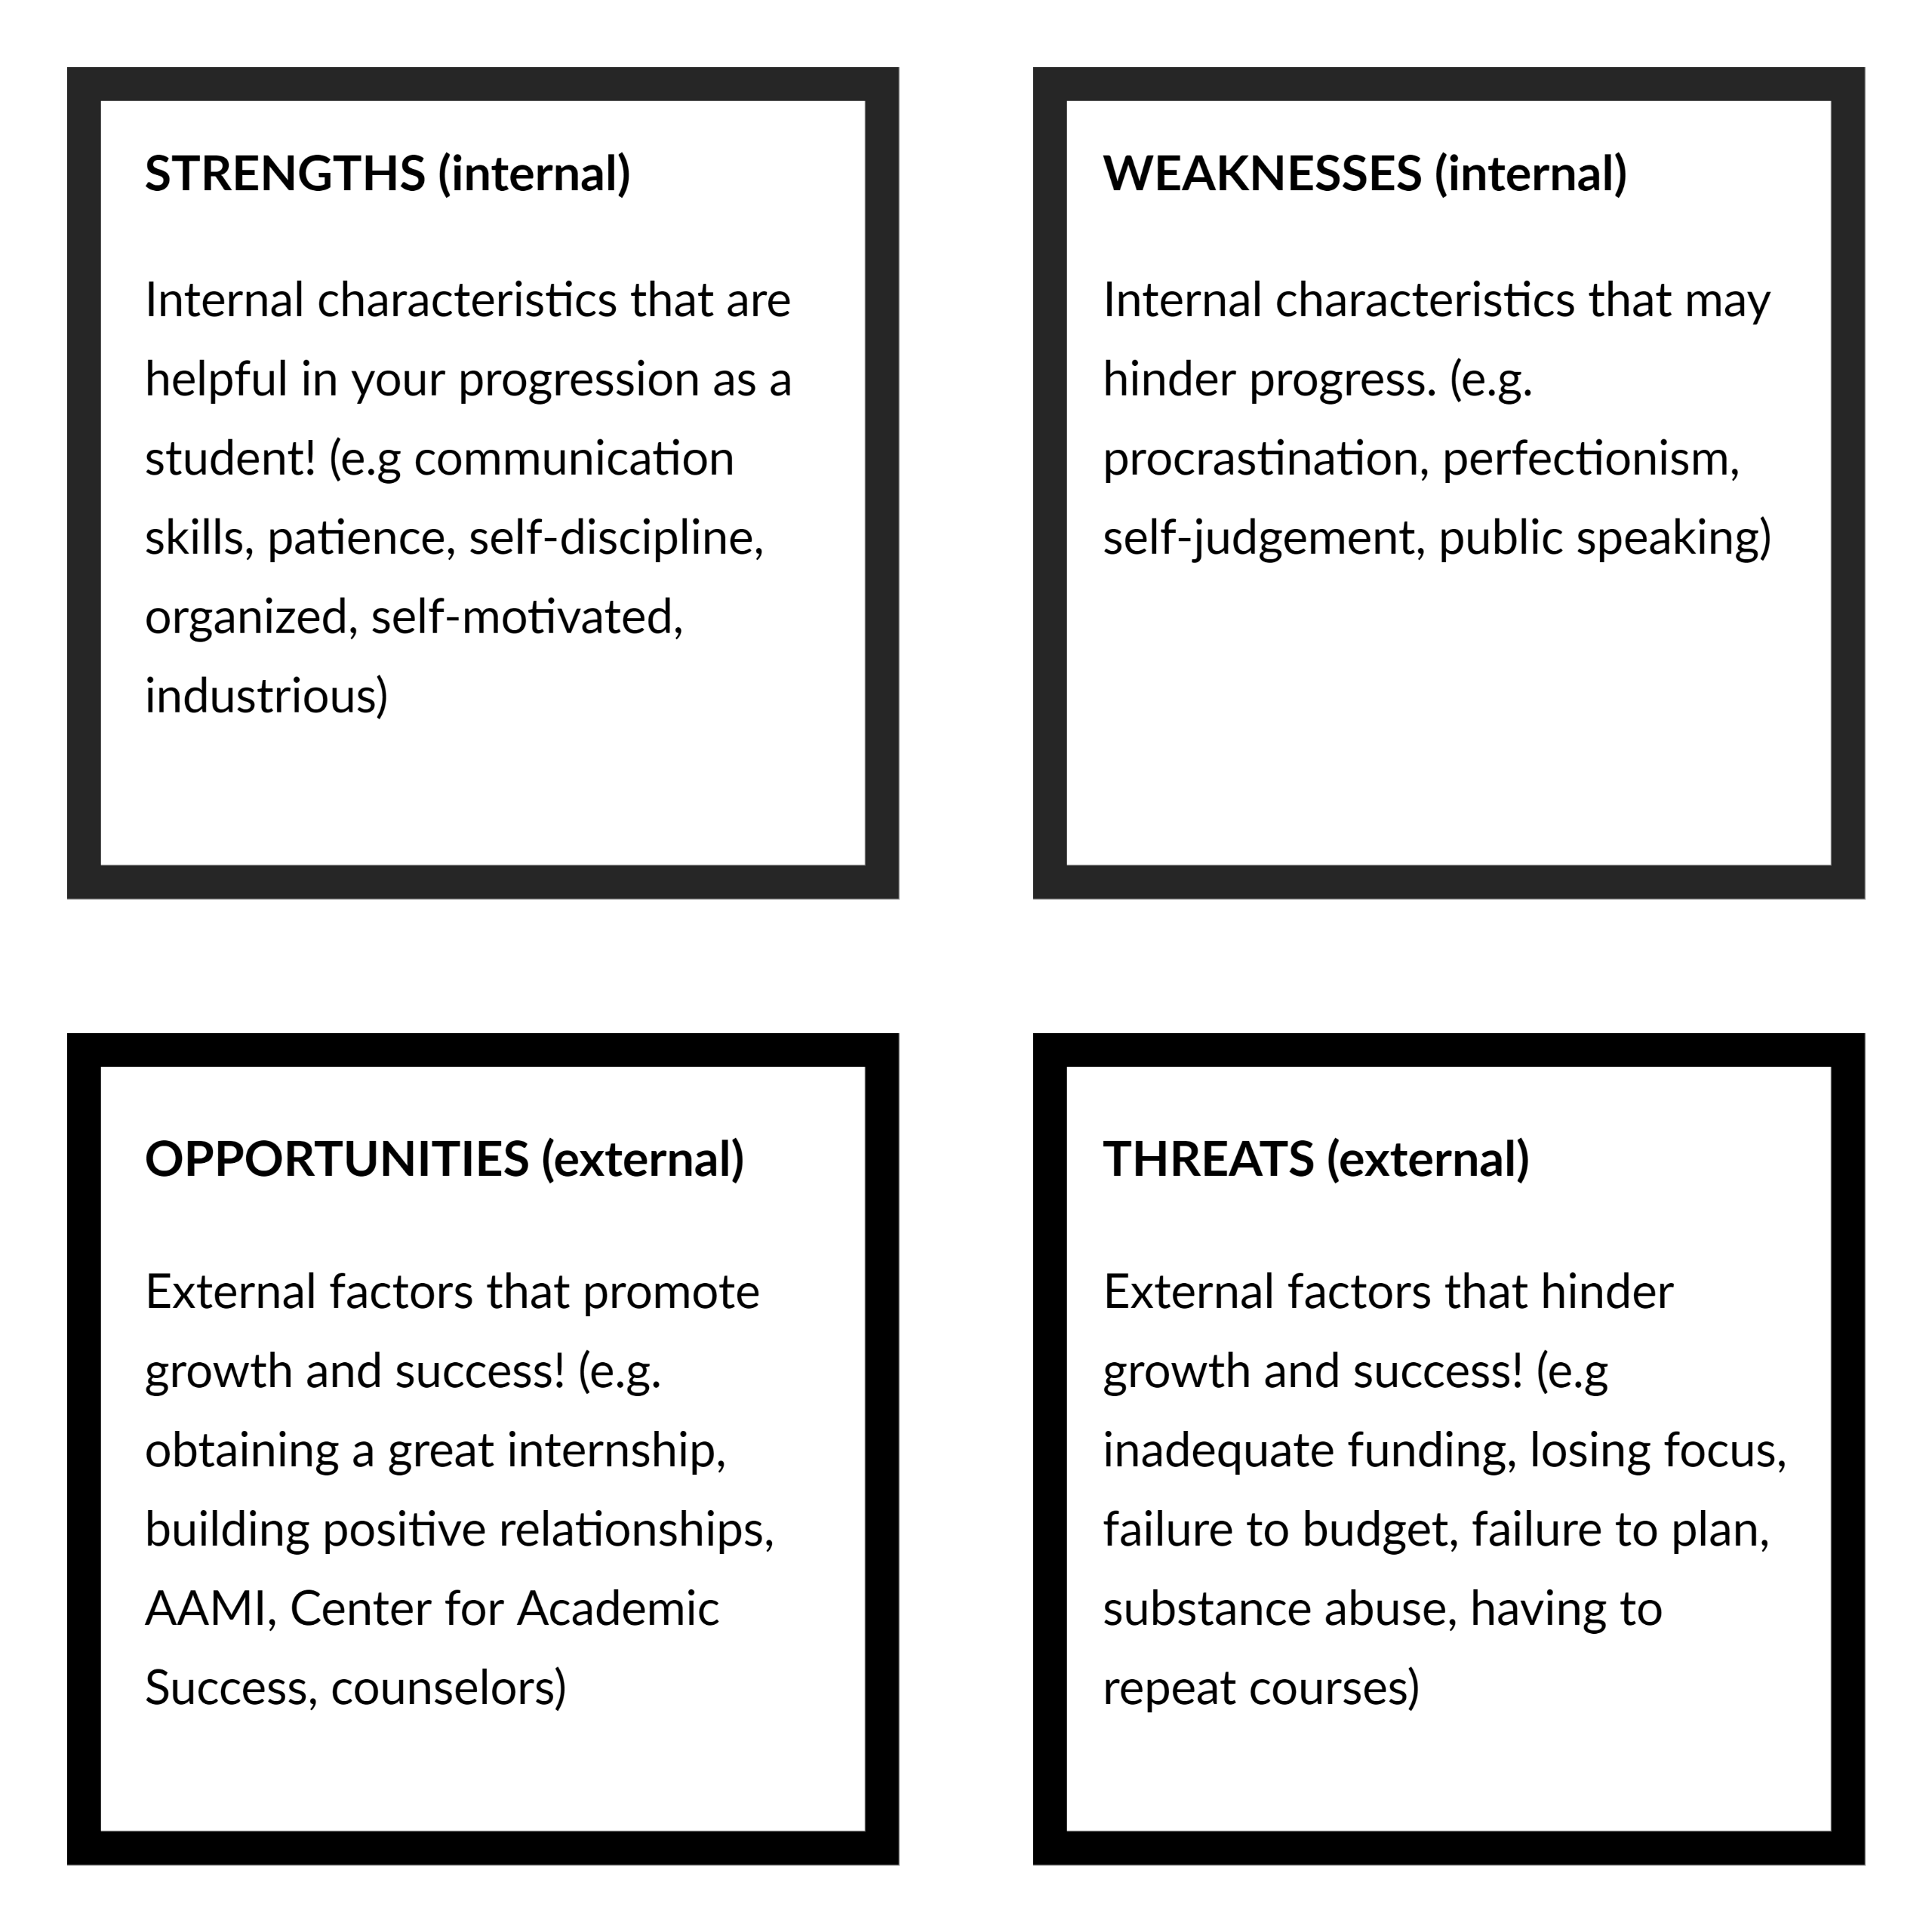 Image from right to left and top to bottom: STRENGTHS (internal)  Internal characteristics that are helpful in your progression as a student! (e.g communication skills, patience, self-discipline, organized, self-motivated, industrious); WEAKNESSES (internal)  Internal characteristics that may hinder progress. (e.g. procrastination, perfectionism, self-judgement, public speaking); OPPORTUNITIES (external)External factors that promote growth and success! (e.g. obtaining a great internship, building positive relationships, AAMI, CAS, counselors); THREATS (external)  External factors that hinder growth and success! (e.g inadequate funding, losing focus, failure to budget, failure to plan, substance abuse, having to repeat courses)